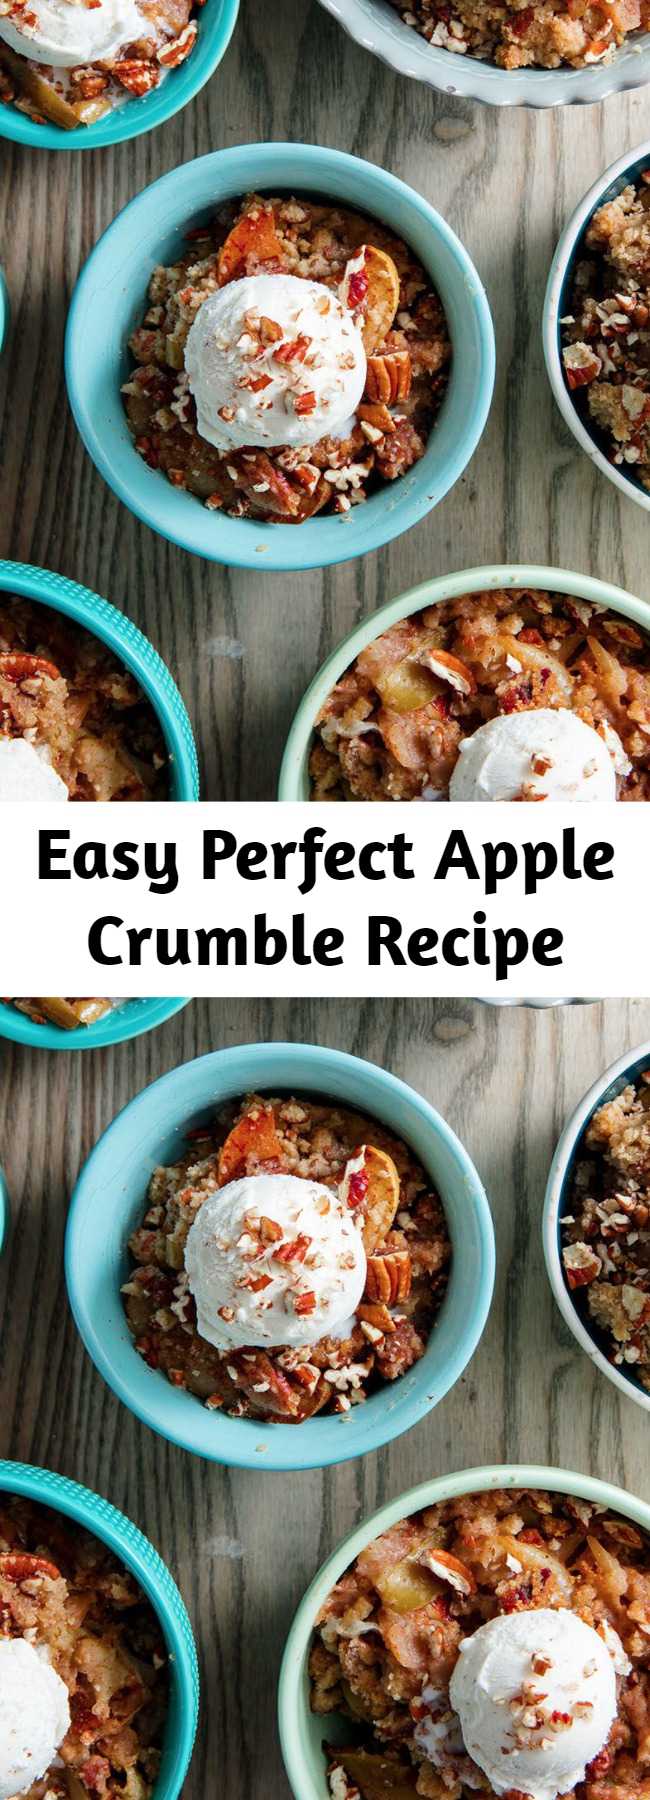 Easy Perfect Apple Crumble Recipe - We love apple pie, but we're not so into making crust. Apple crumble is 1,000 times easier to make and, in our opinion, even better. The buttery pecan crumble is just too perfect, even without any oats. Below are our most helpful tips for making the perfect fall crumble. #easy #recipe #apple #crumble #dessert #baking #fall #brownsugar #pecans #pie #topping